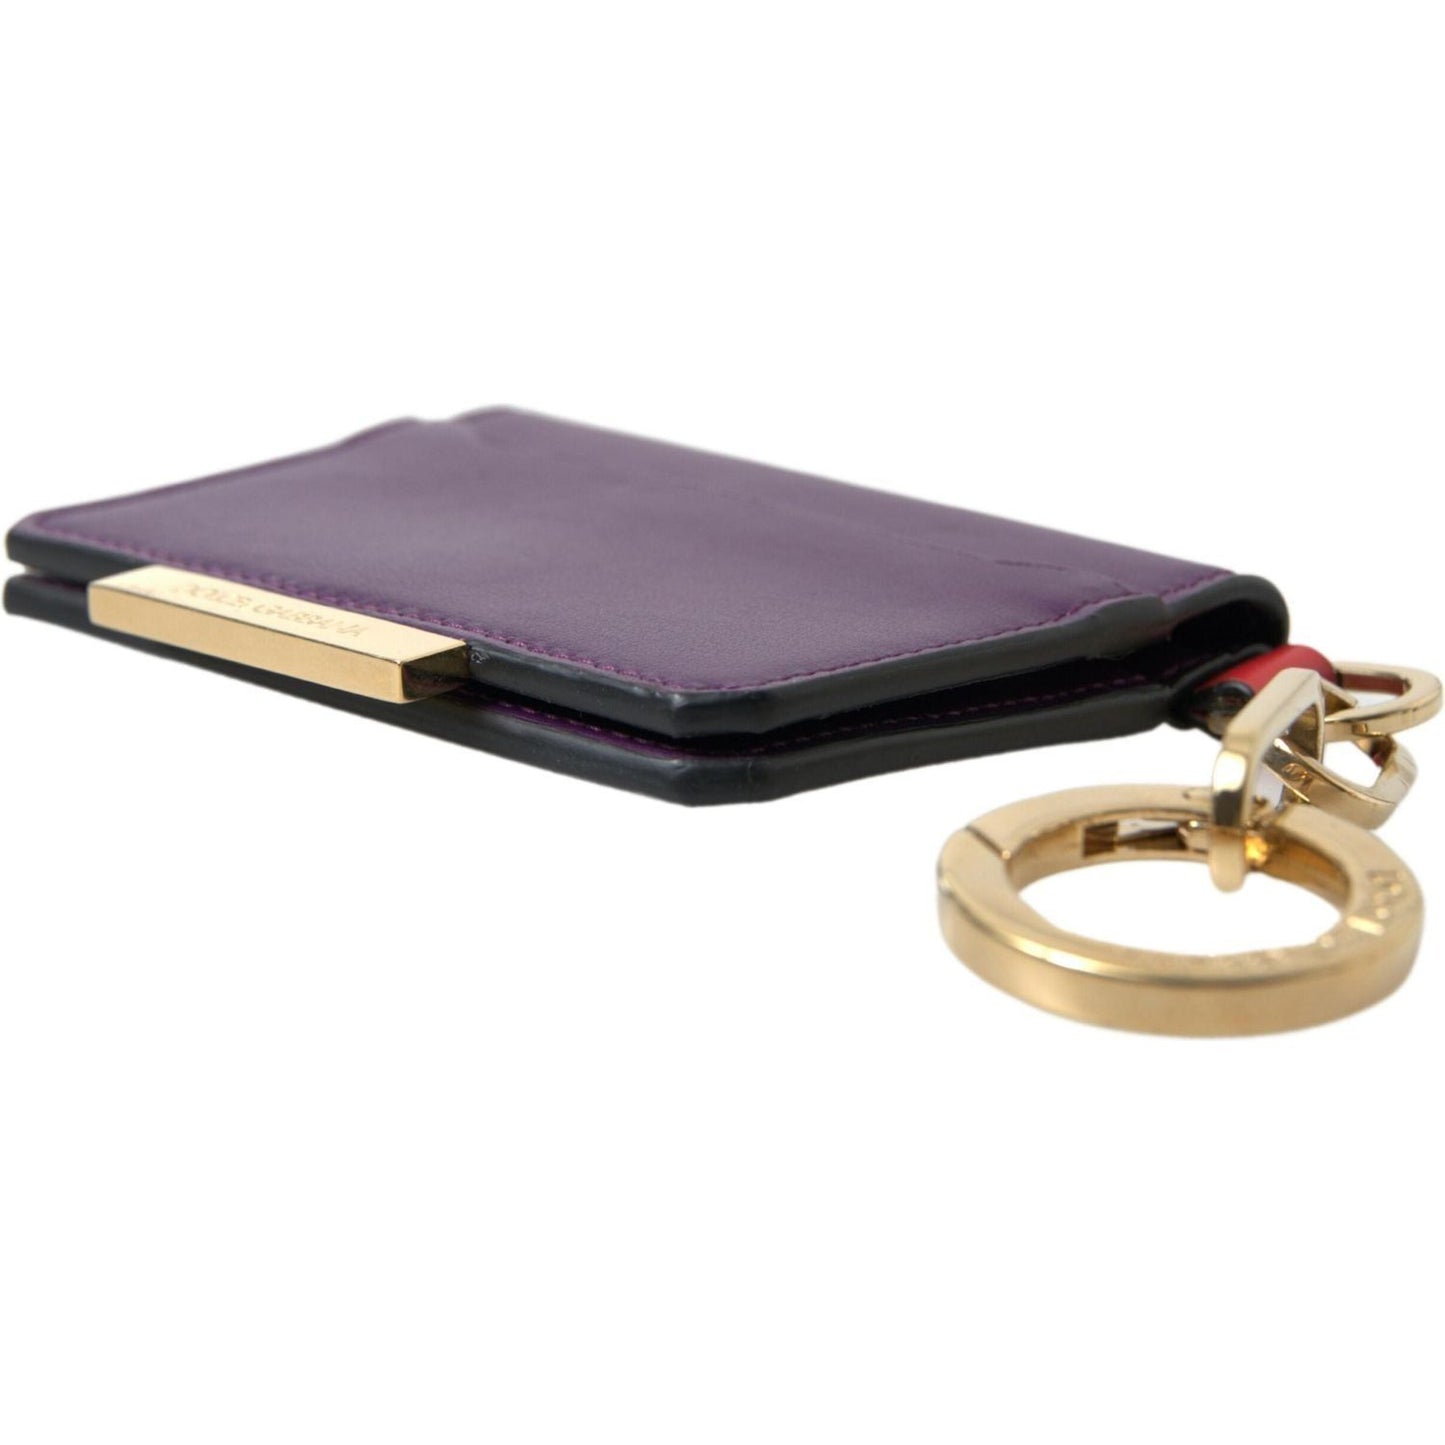 Dolce & Gabbana Purple Leather French Flap Wallet purple-calf-leather-bifold-logo-card-holder-wallet